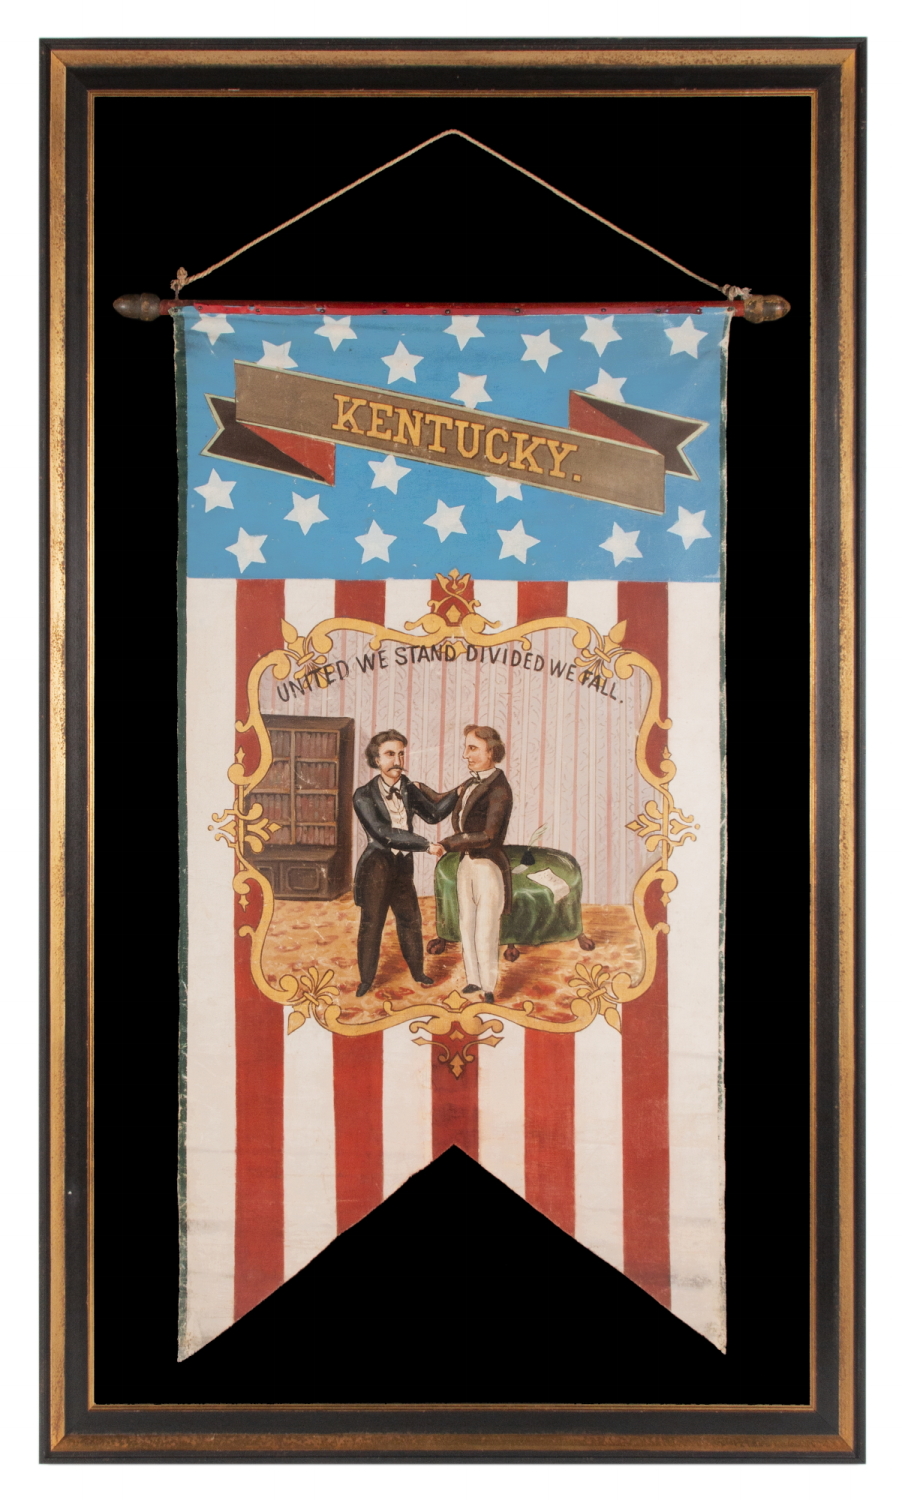 HAND-PAINTED PATRIOTIC BANNER WITH THE SEAL OF THE STATE OF KENTUCKY AND SPECTACULAR PRESENTATION, WITH GREAT FOLK QUALITIES, PROBABLY MADE FOR THE 1868 DEMOCRAT NATIONAL CONVENTION IN NEW YORK CITY